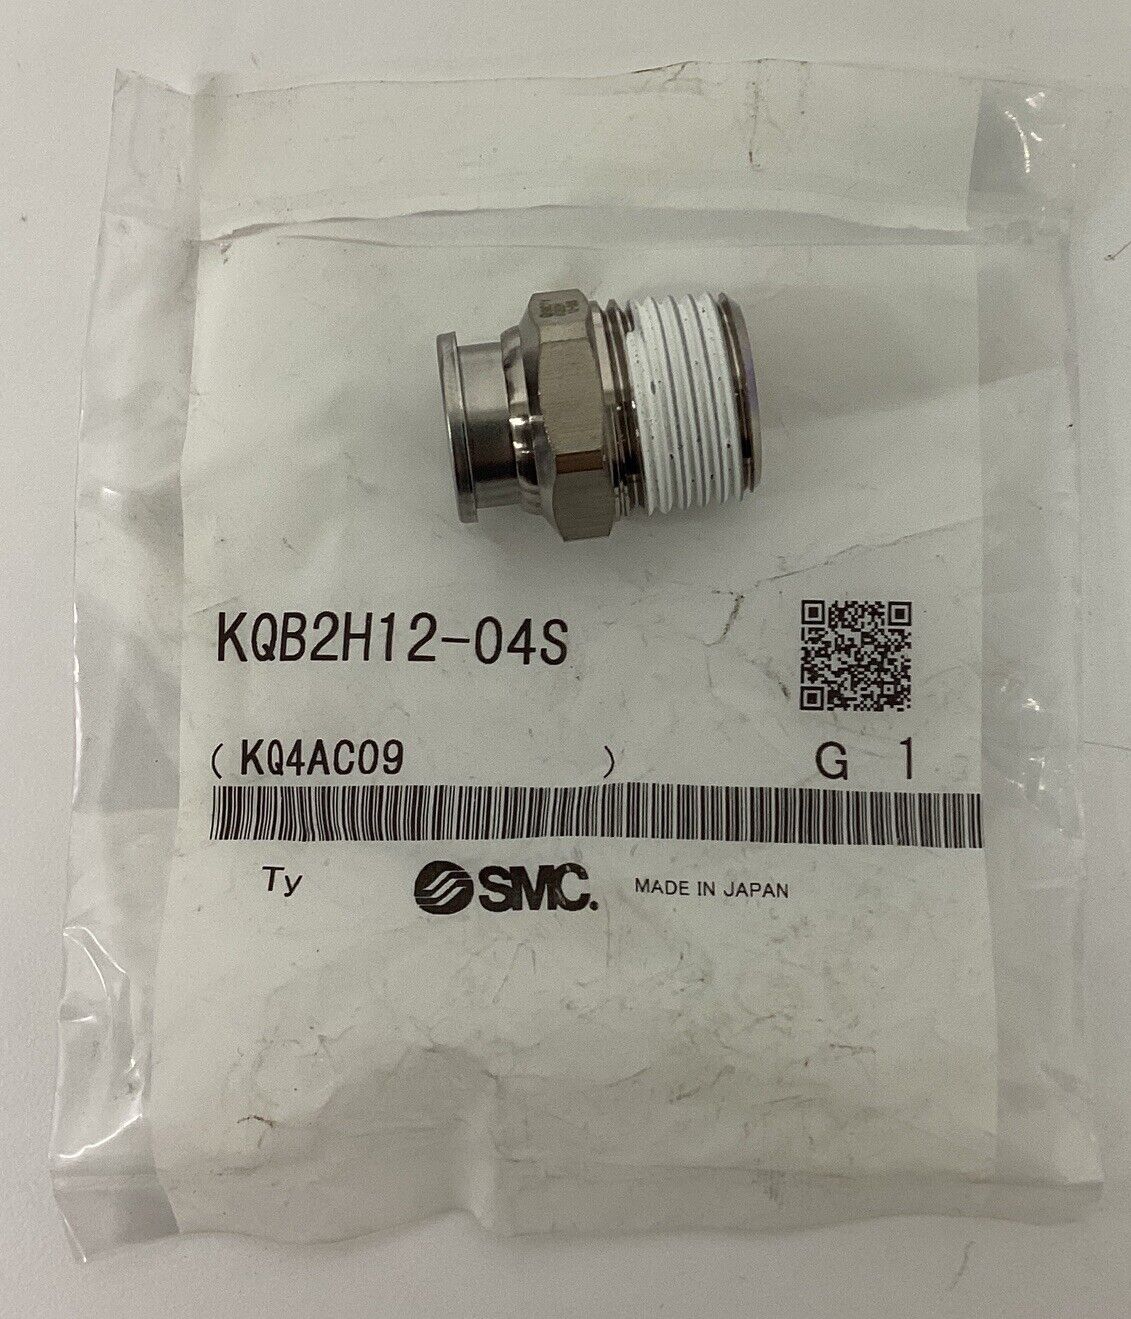 SMC KQB2H12-04S White Brass one touch fitting (BL286) - 0